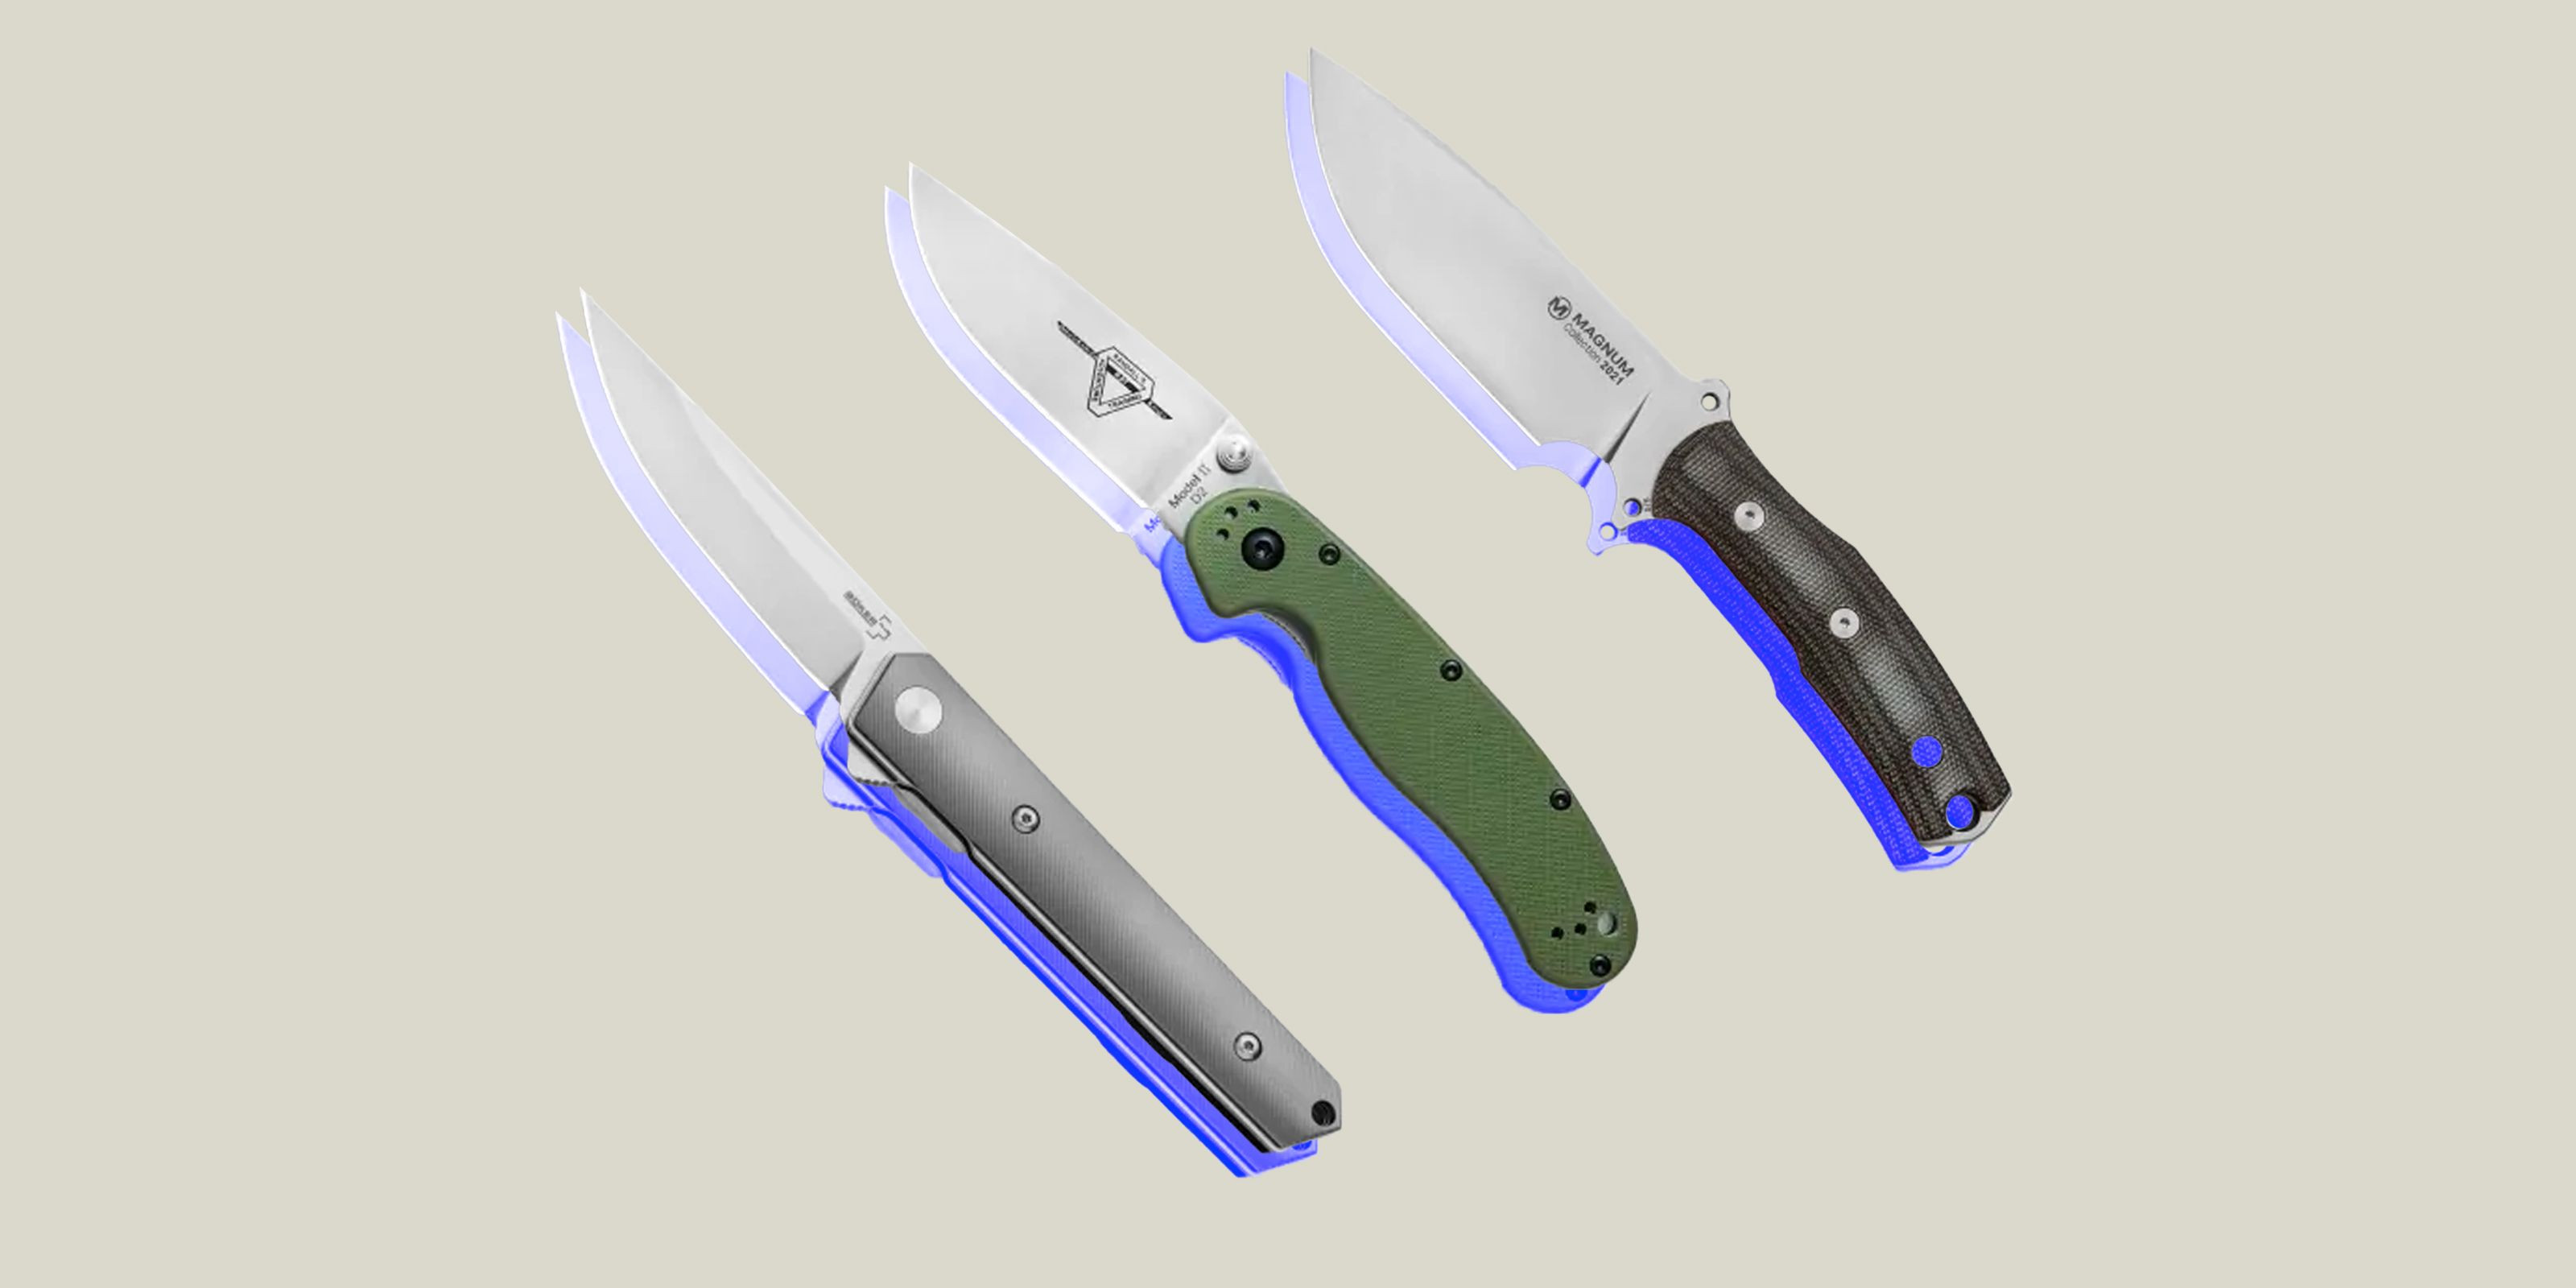 The Best Cheap Pocket Knives to Buy in 2021